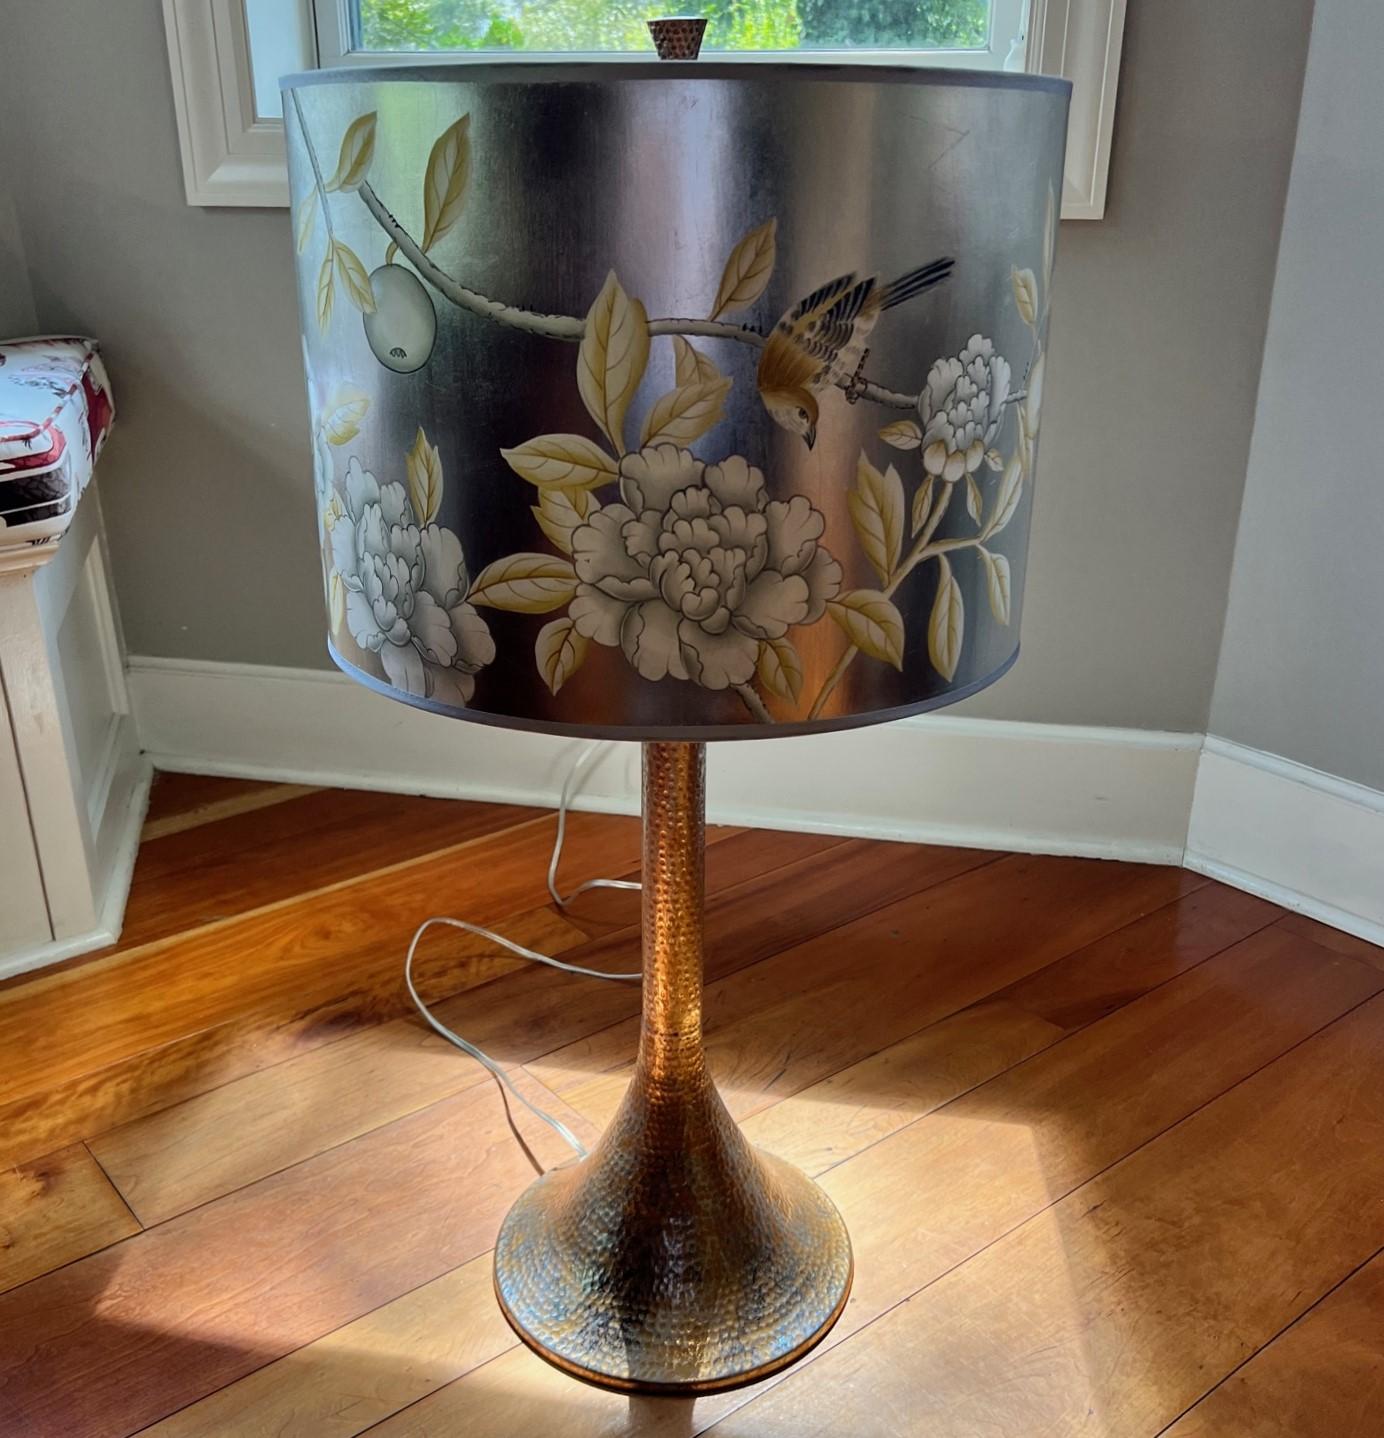 21st c. Jamie Young & Co. hammered cast metal lamp with a hand applied finish that mixes gold and silver leaf to create a platinum tone patina. The drum shade is hand painted paper over linen, made in the USA. This particular shade and base